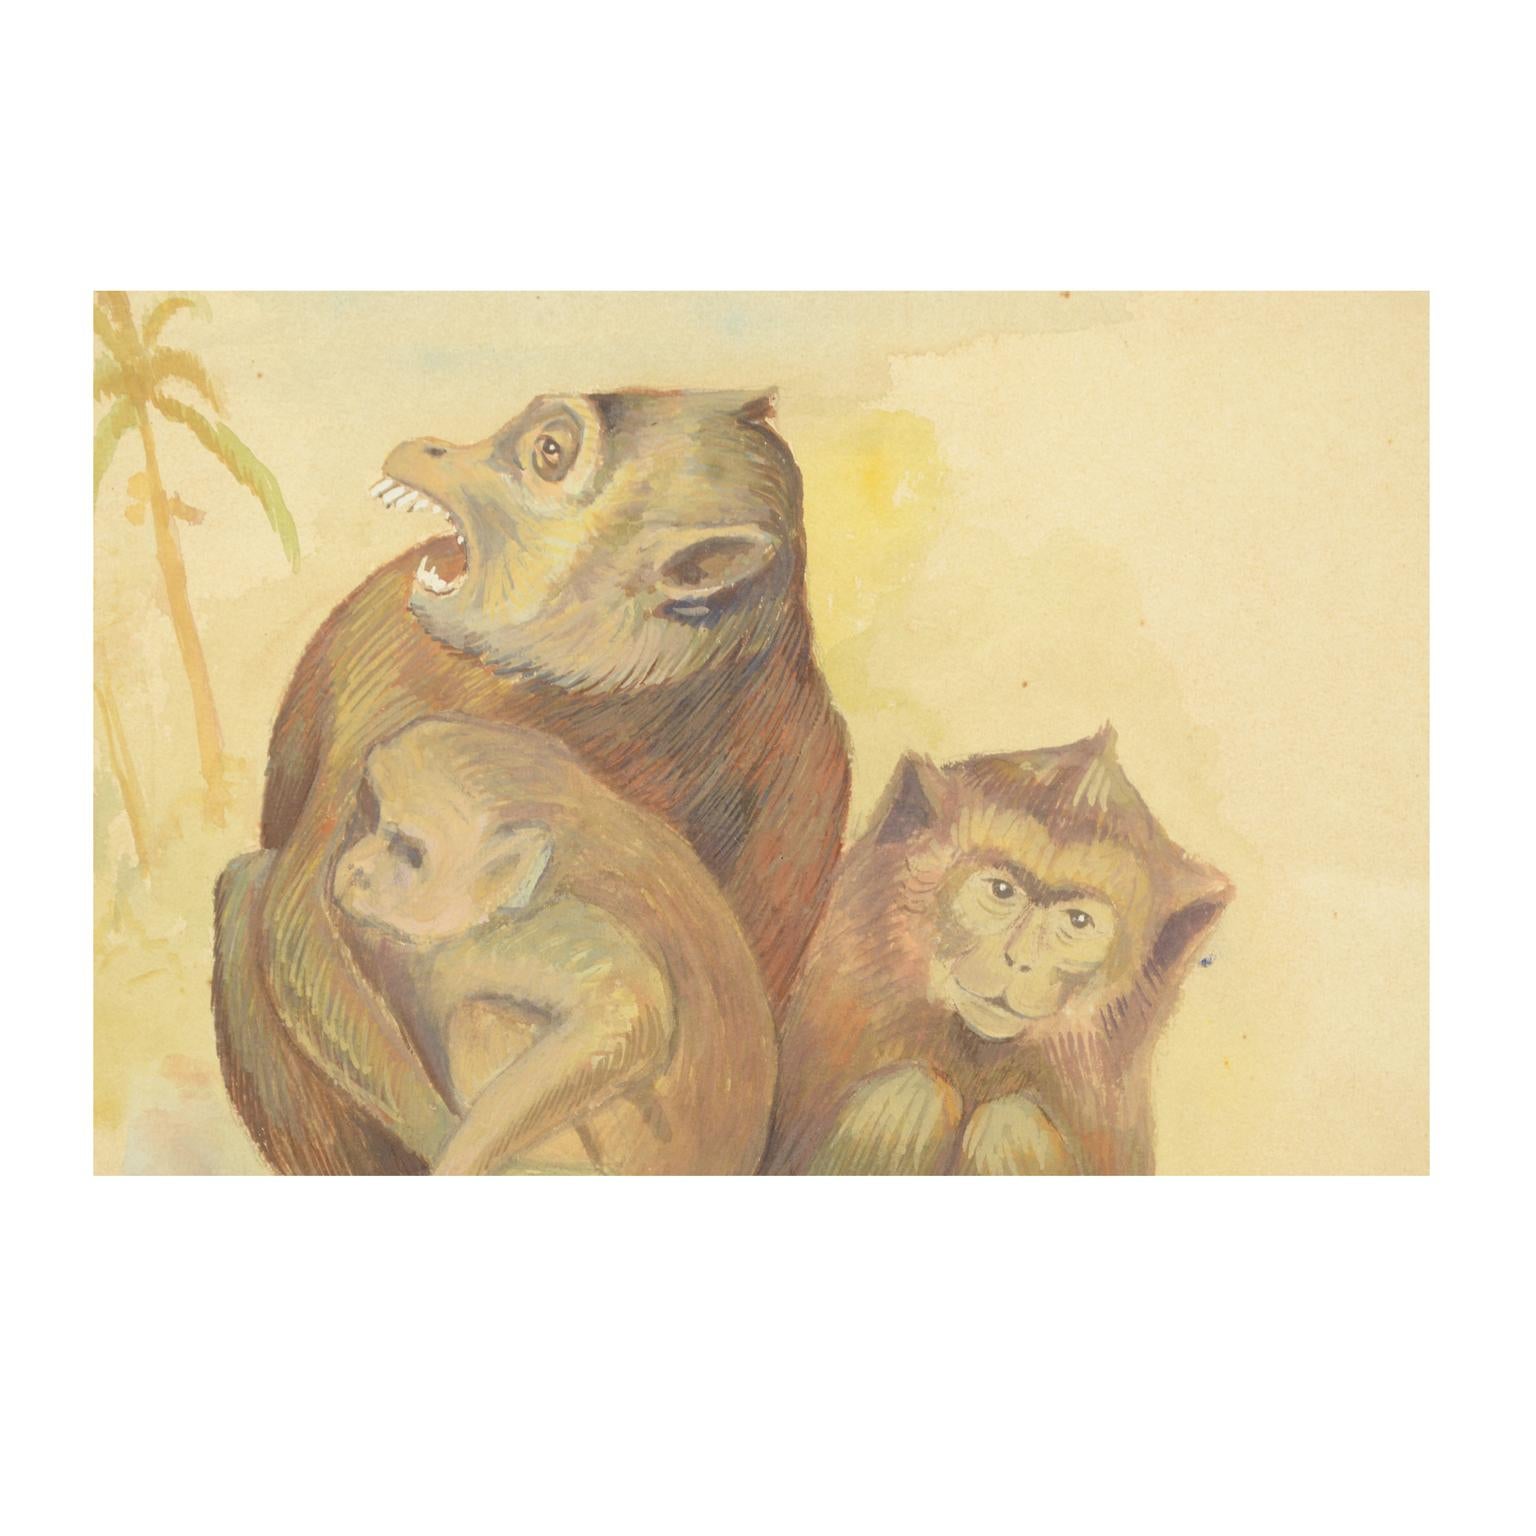 Sketch of Four Macaques Korea 1970s Acrylic on Paper for an Animals Encyclopedia For Sale 1